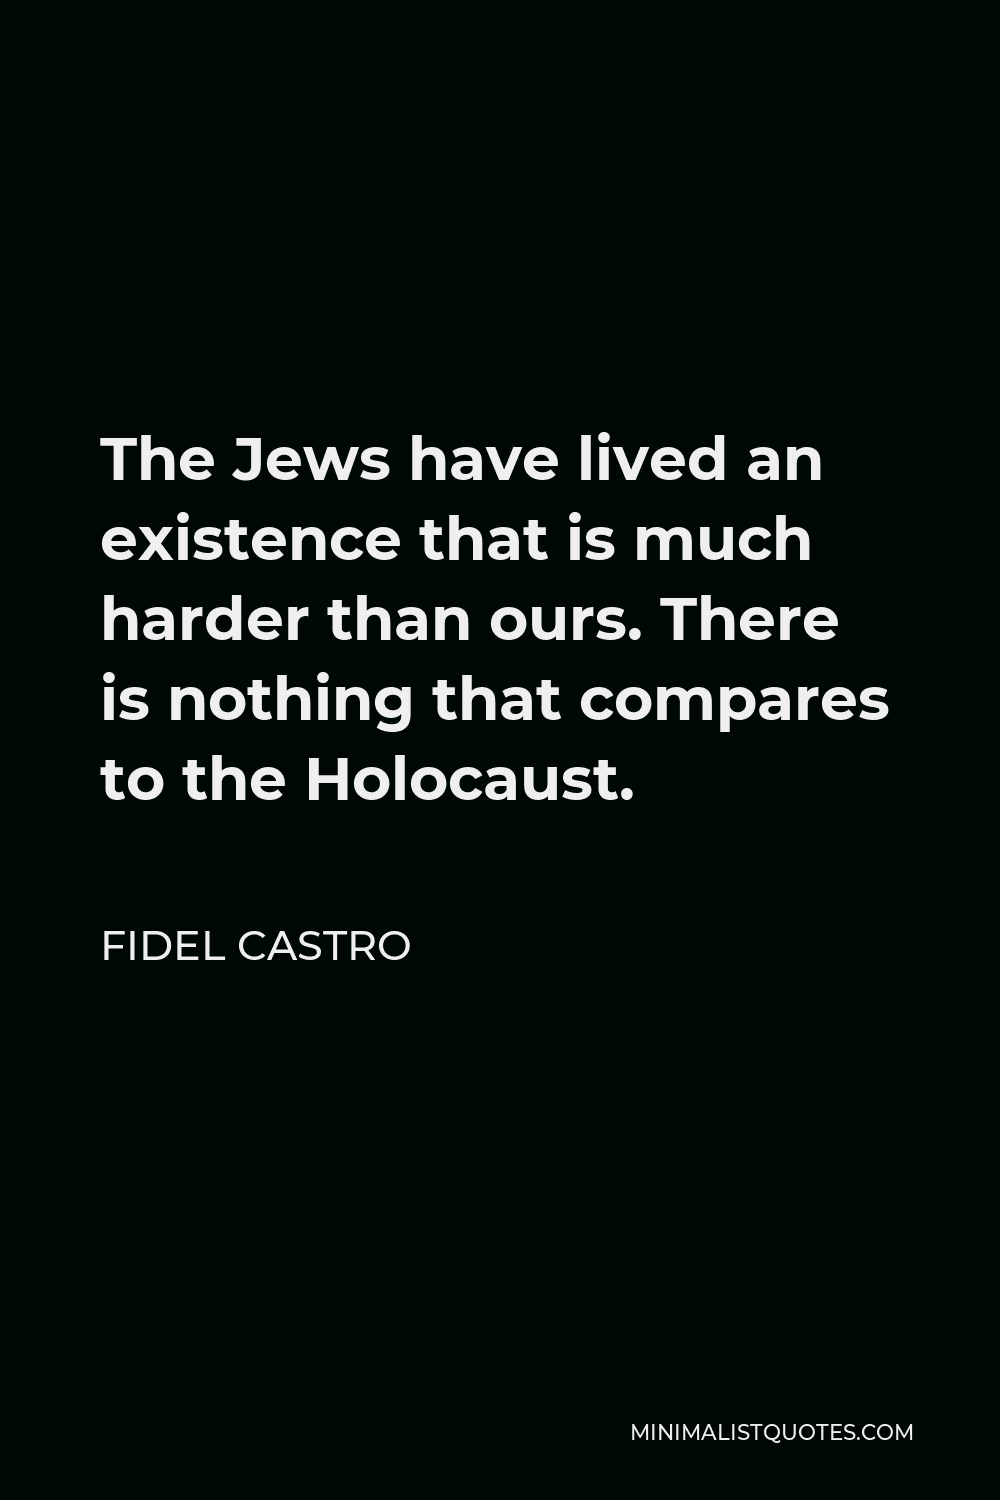 Fidel Castro Quote - The Jews have lived an existence that is much harder than ours. There is nothing that compares to the Holocaust.